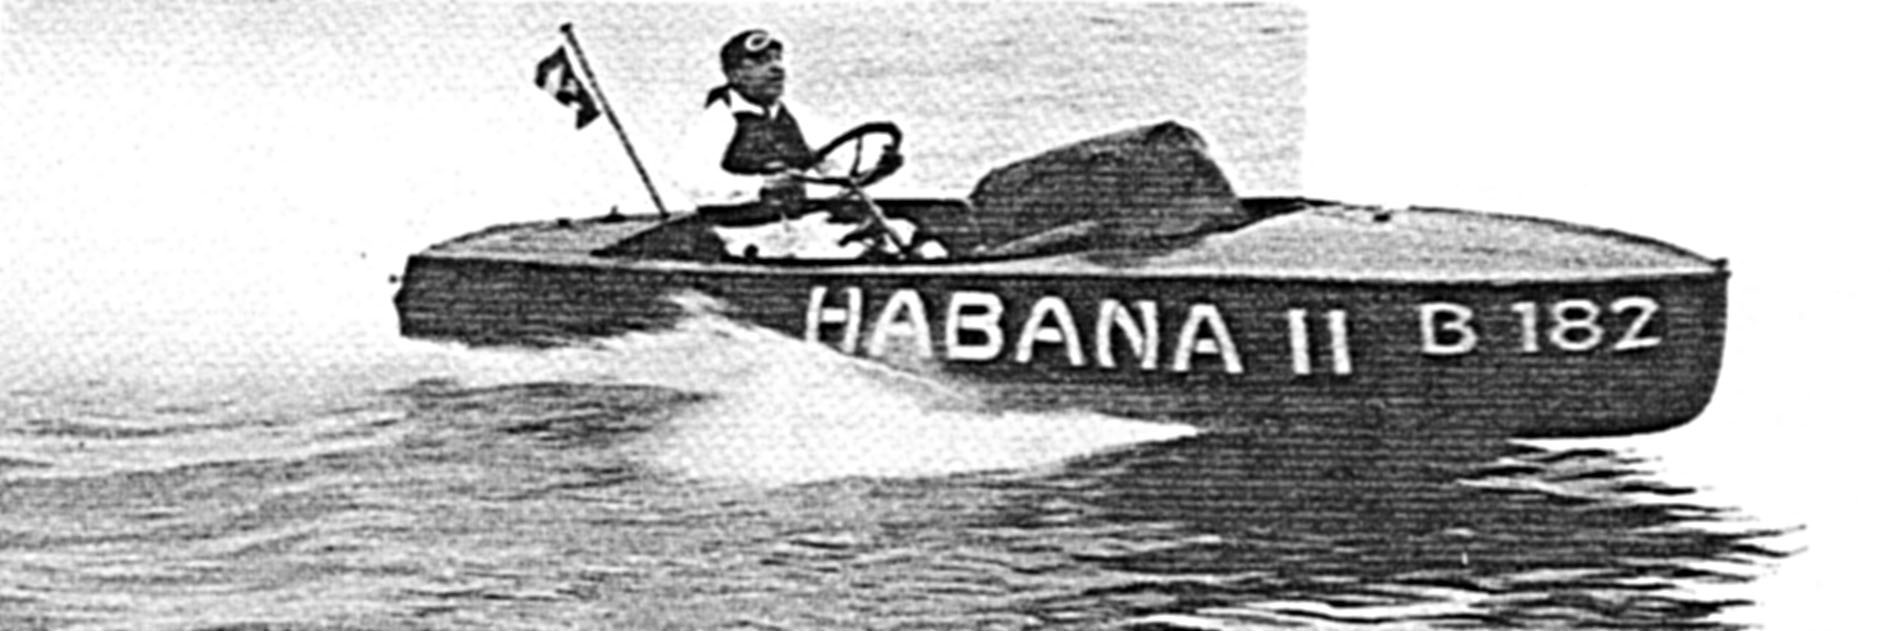 Habana II. the Cuban entry in the 151-Class, driven by Ramon Suero. took second honors in the unlimited class.
